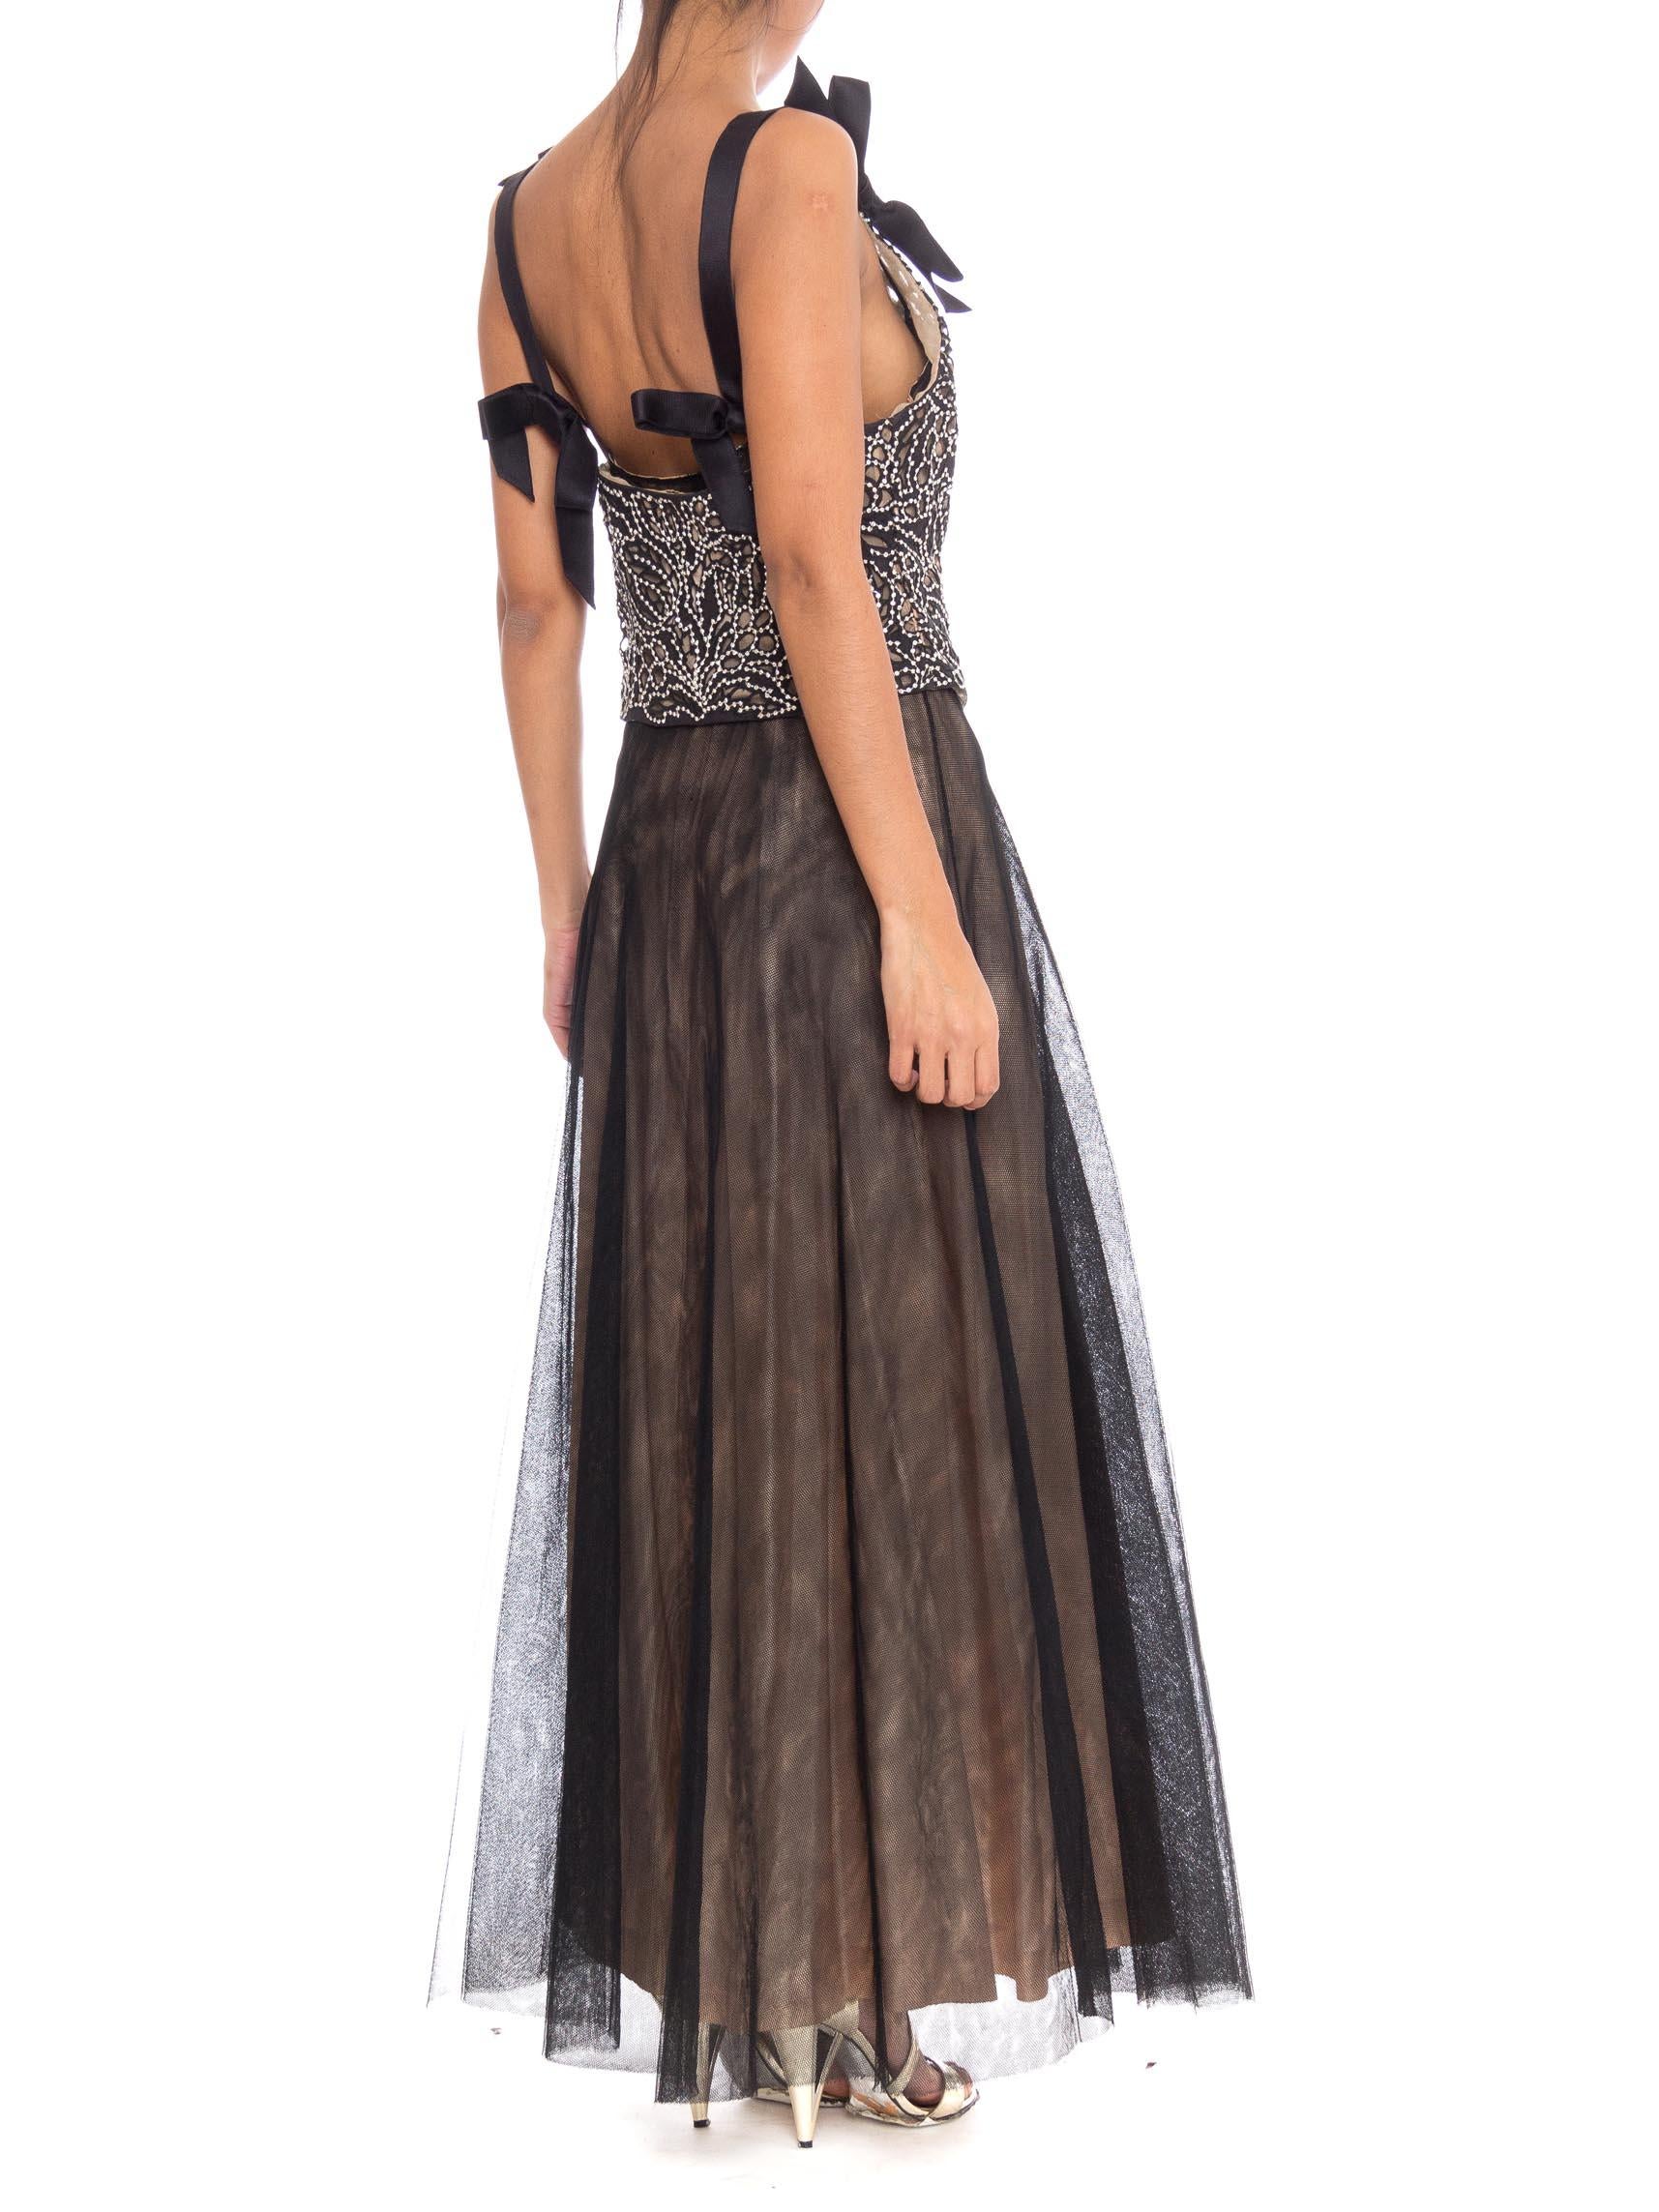 1980 VALENTINO Black Silk Tulle Couture Quality Gown With Lace And Crystal Bodi In Excellent Condition For Sale In New York, NY